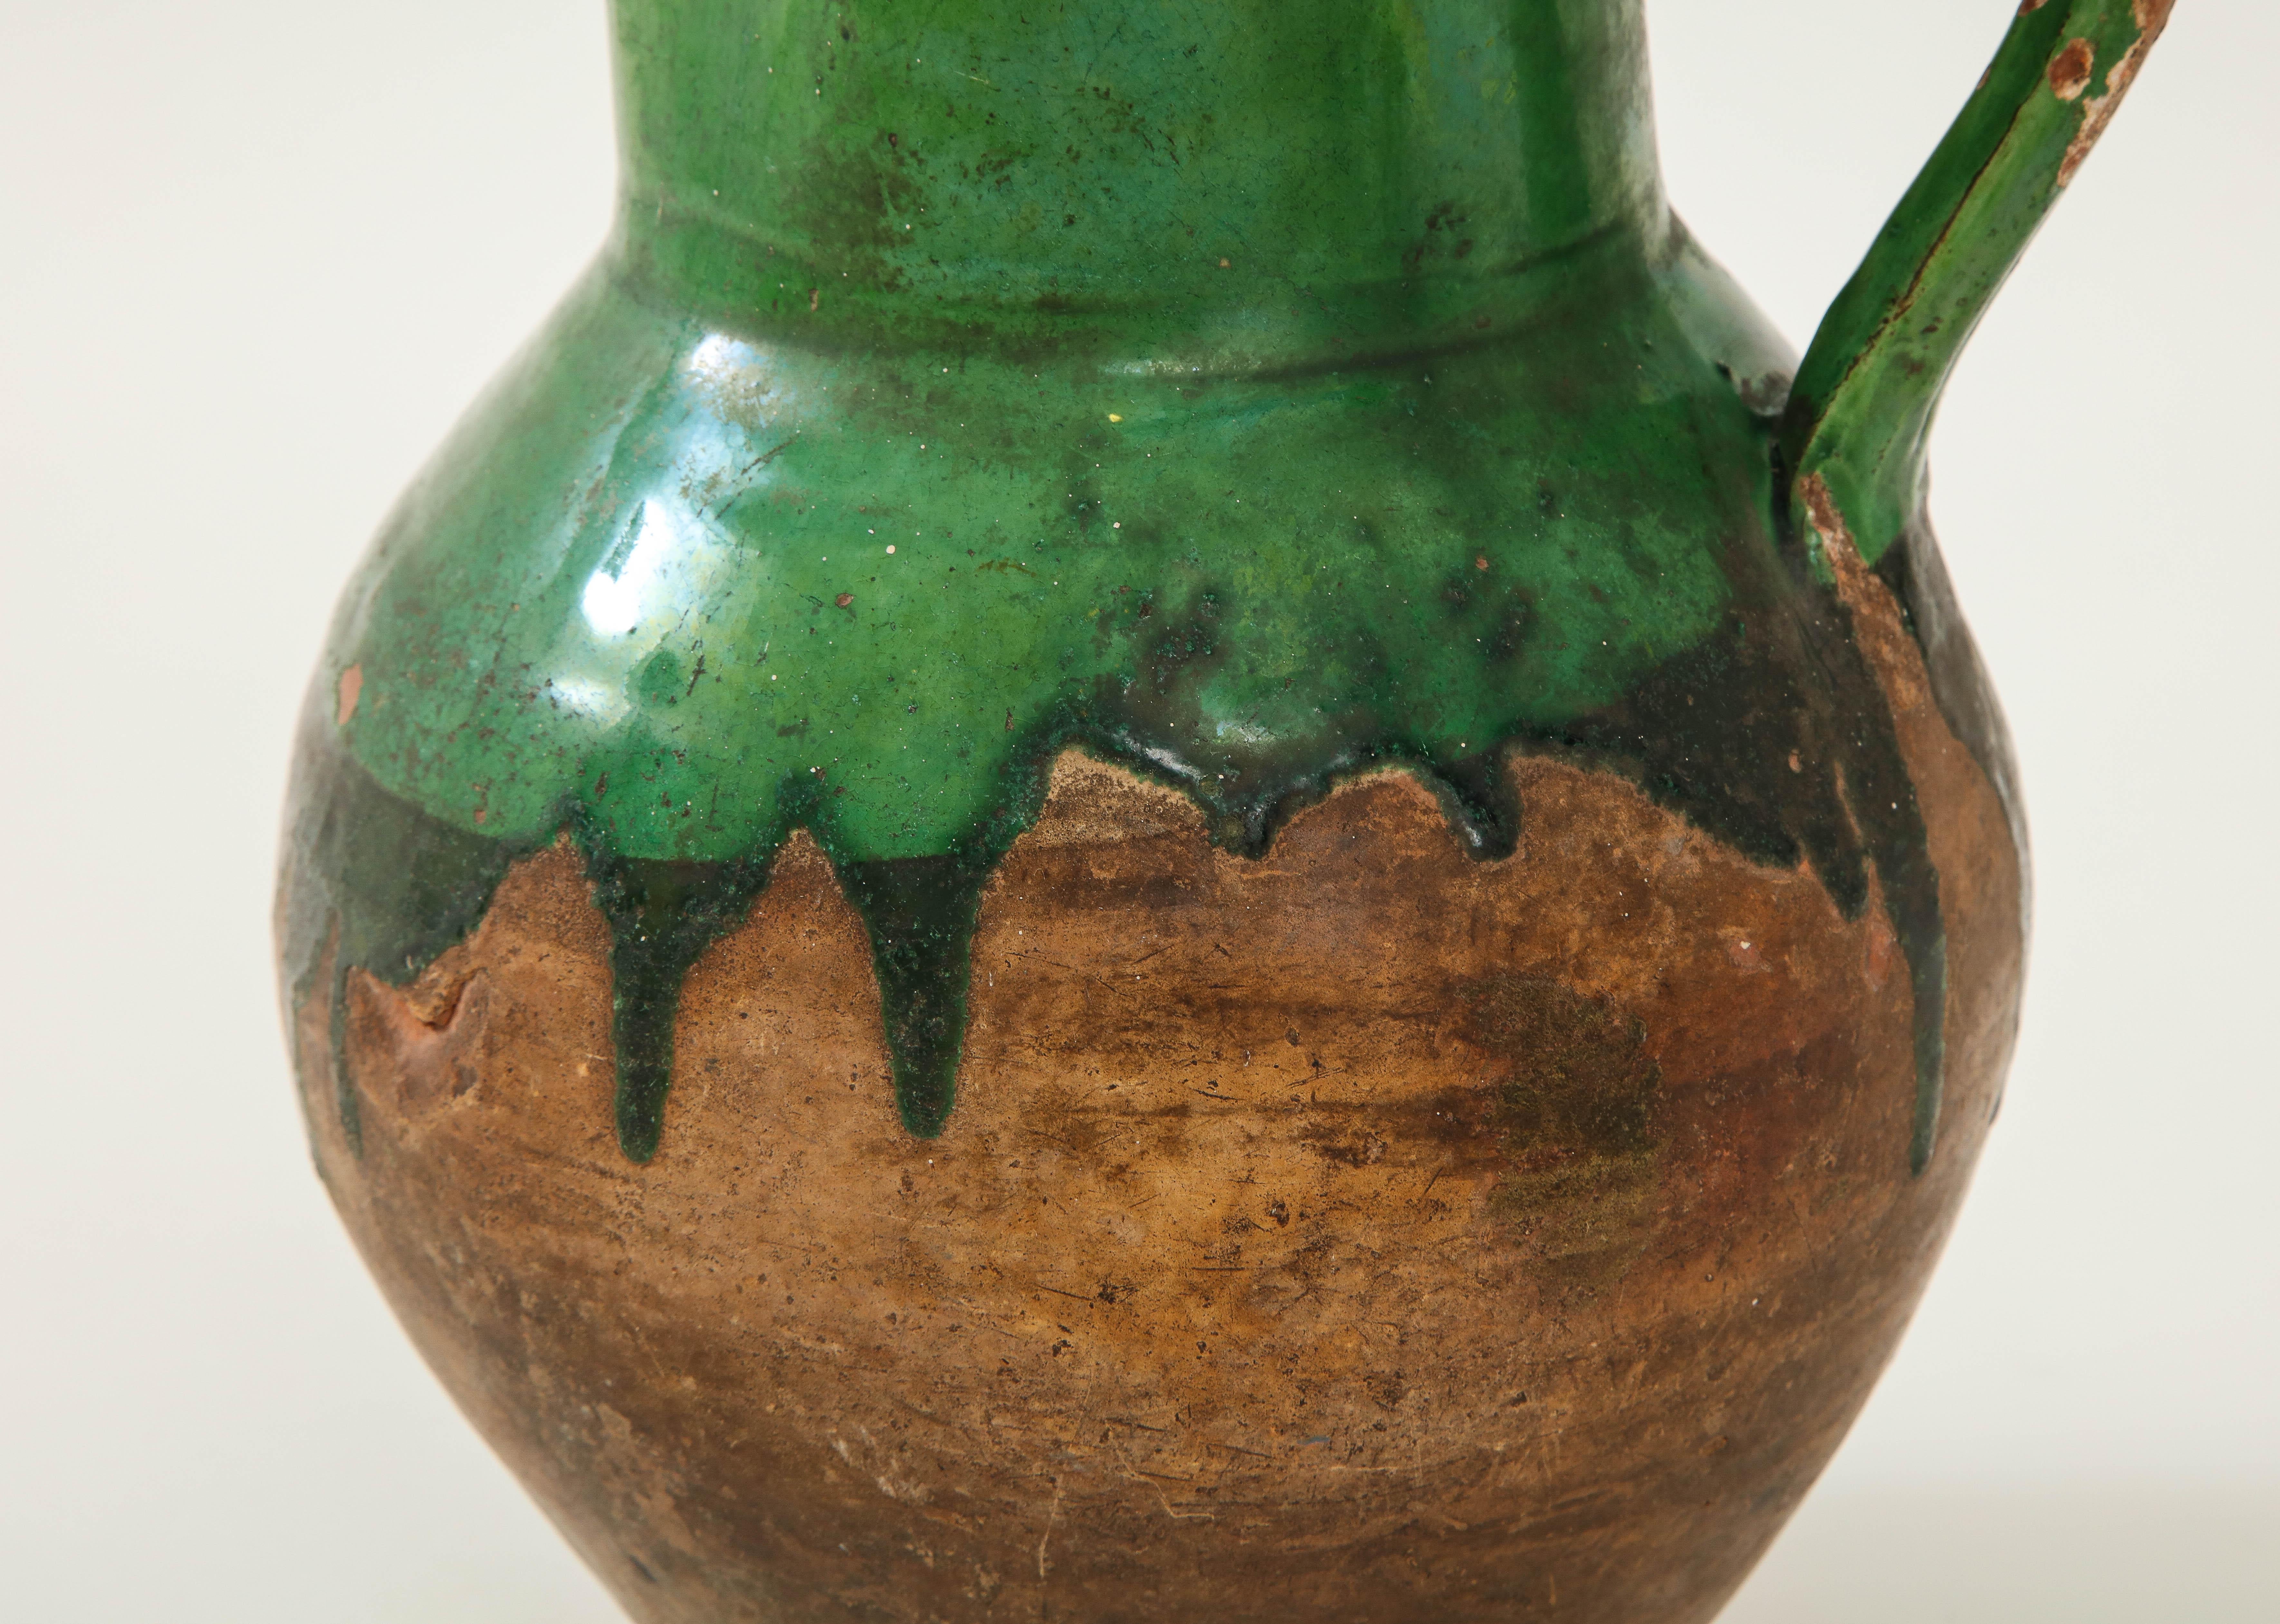 Dutch 17th Century Earthenware Pitcher with Yellow and Green Glaze, Friesland